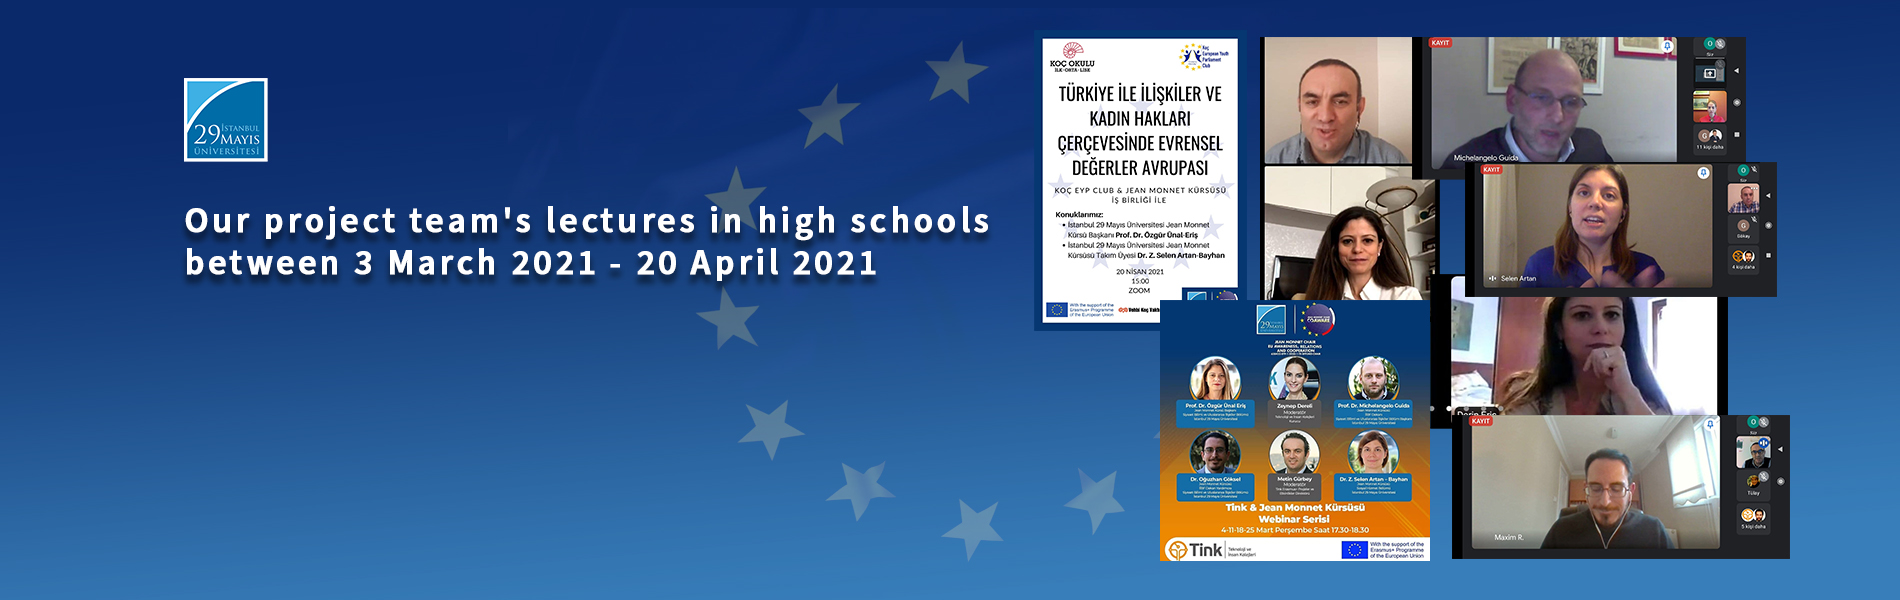 Our Project Team’s Lectures in High Schools Between 3 March 2021 – 20 April 2021